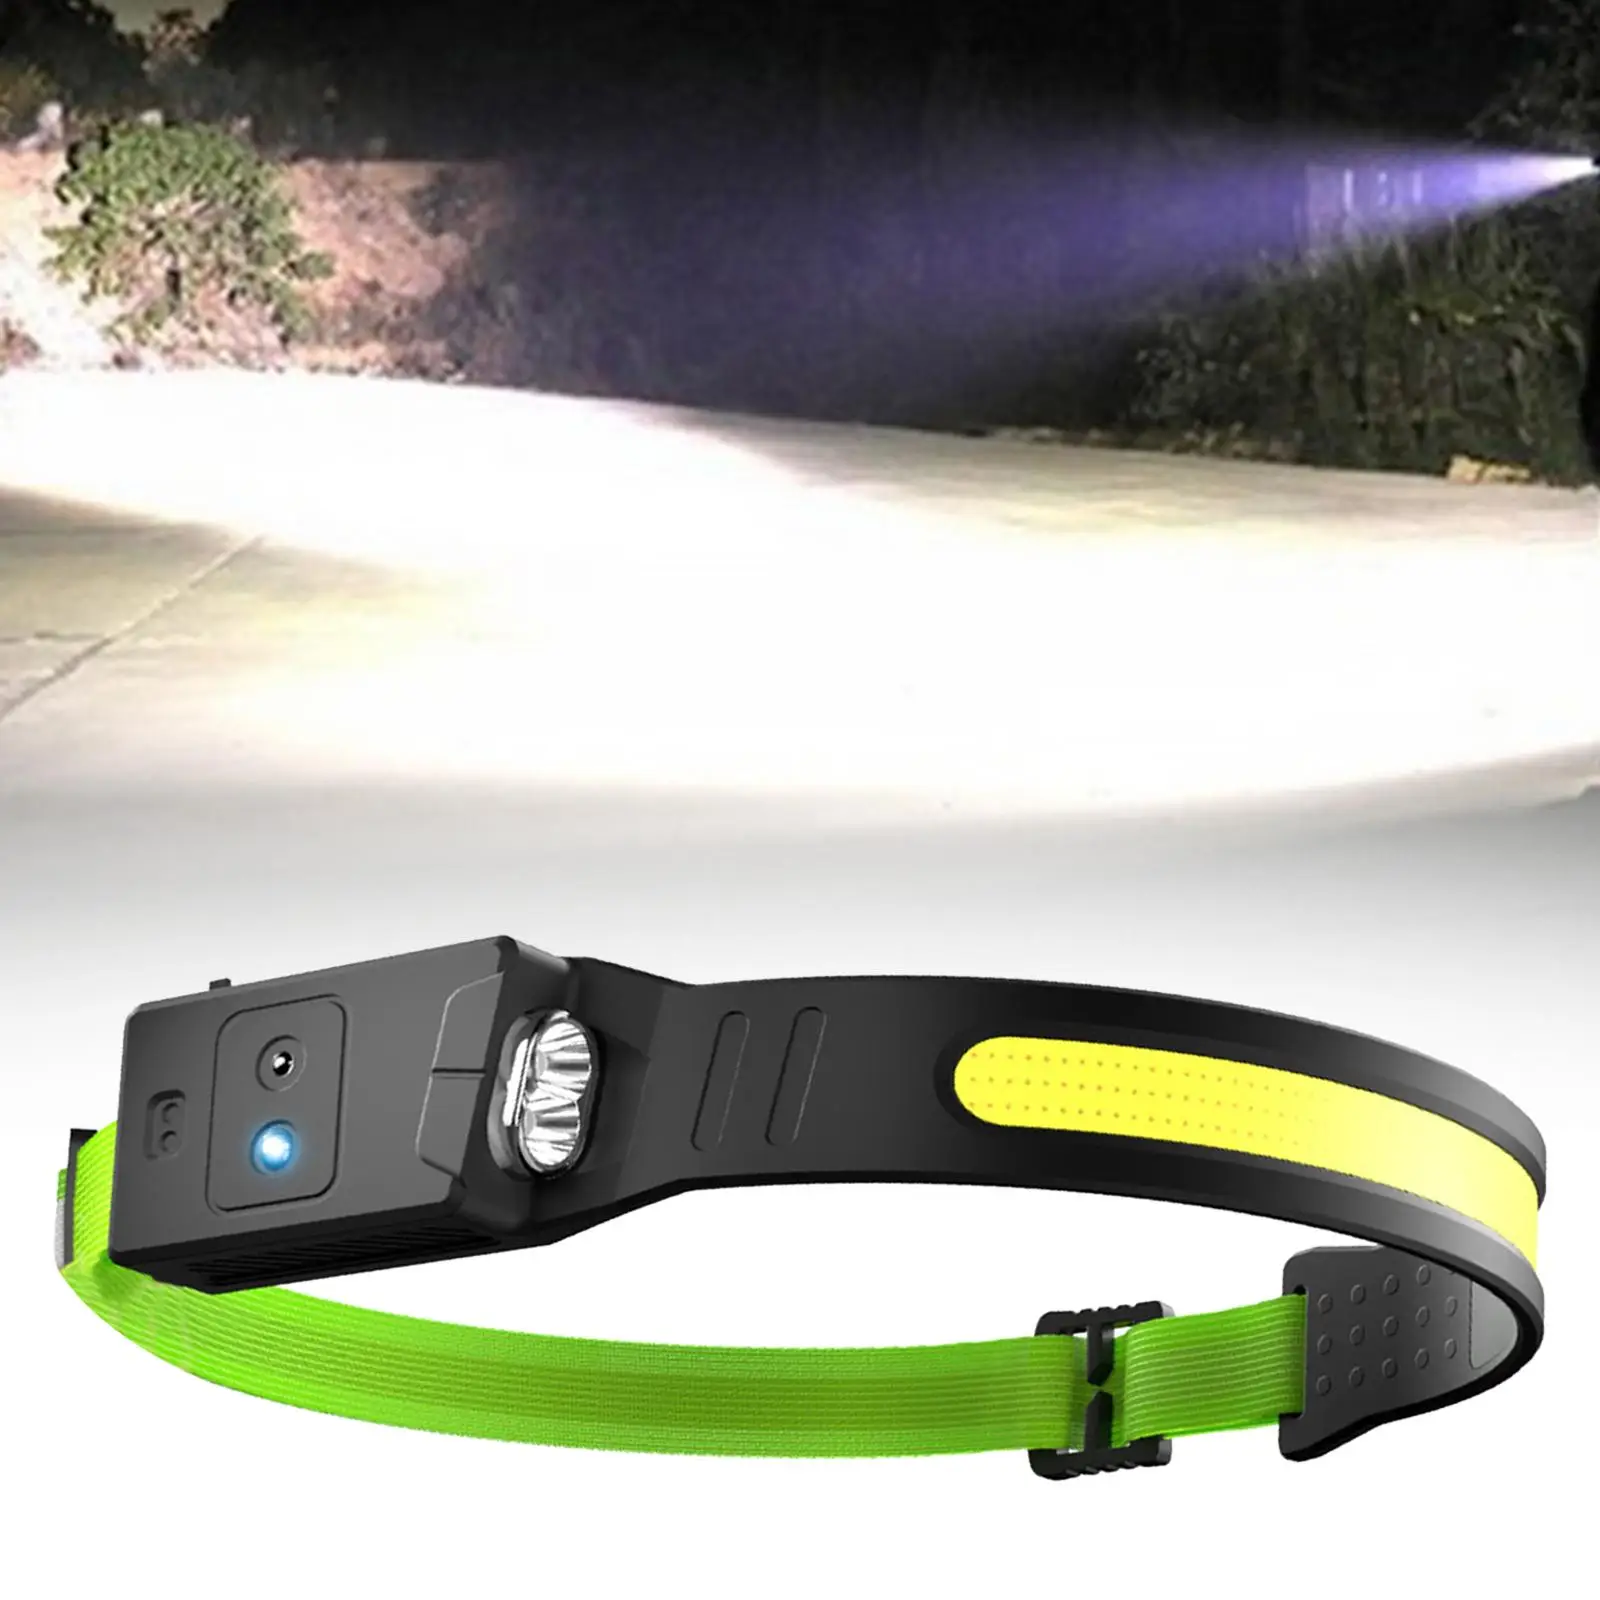 LED Headlamp Hand Sensor IPX4 Waterproof 3 Modes Lightweight Super Bright flashlights for Jogging Cycling Fishing Camping Adults